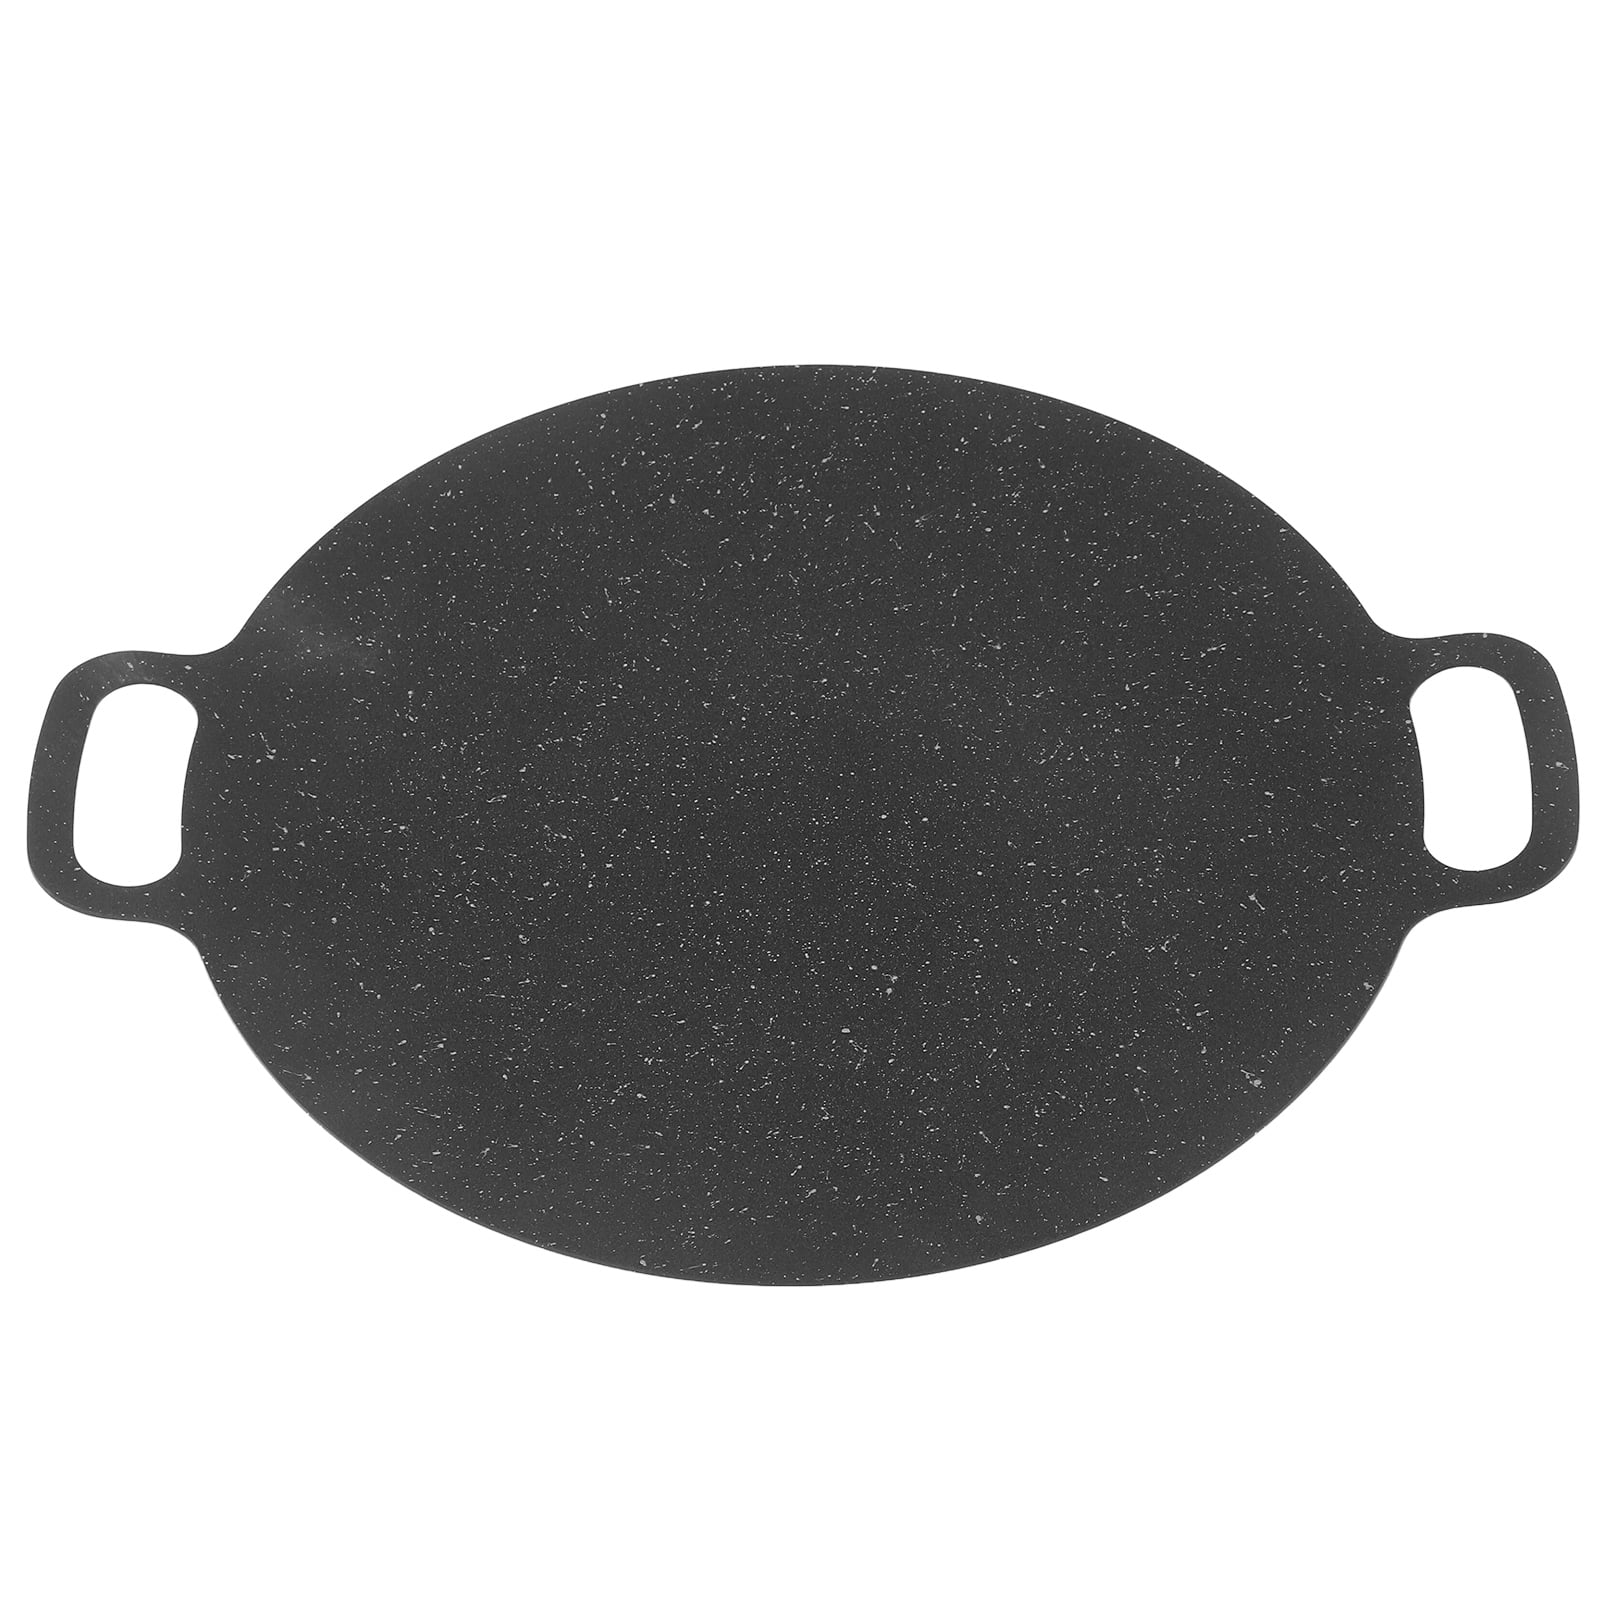 1pc Cast Iron Korean Bbq Grill Plate, Outdoor Cooking Griddle